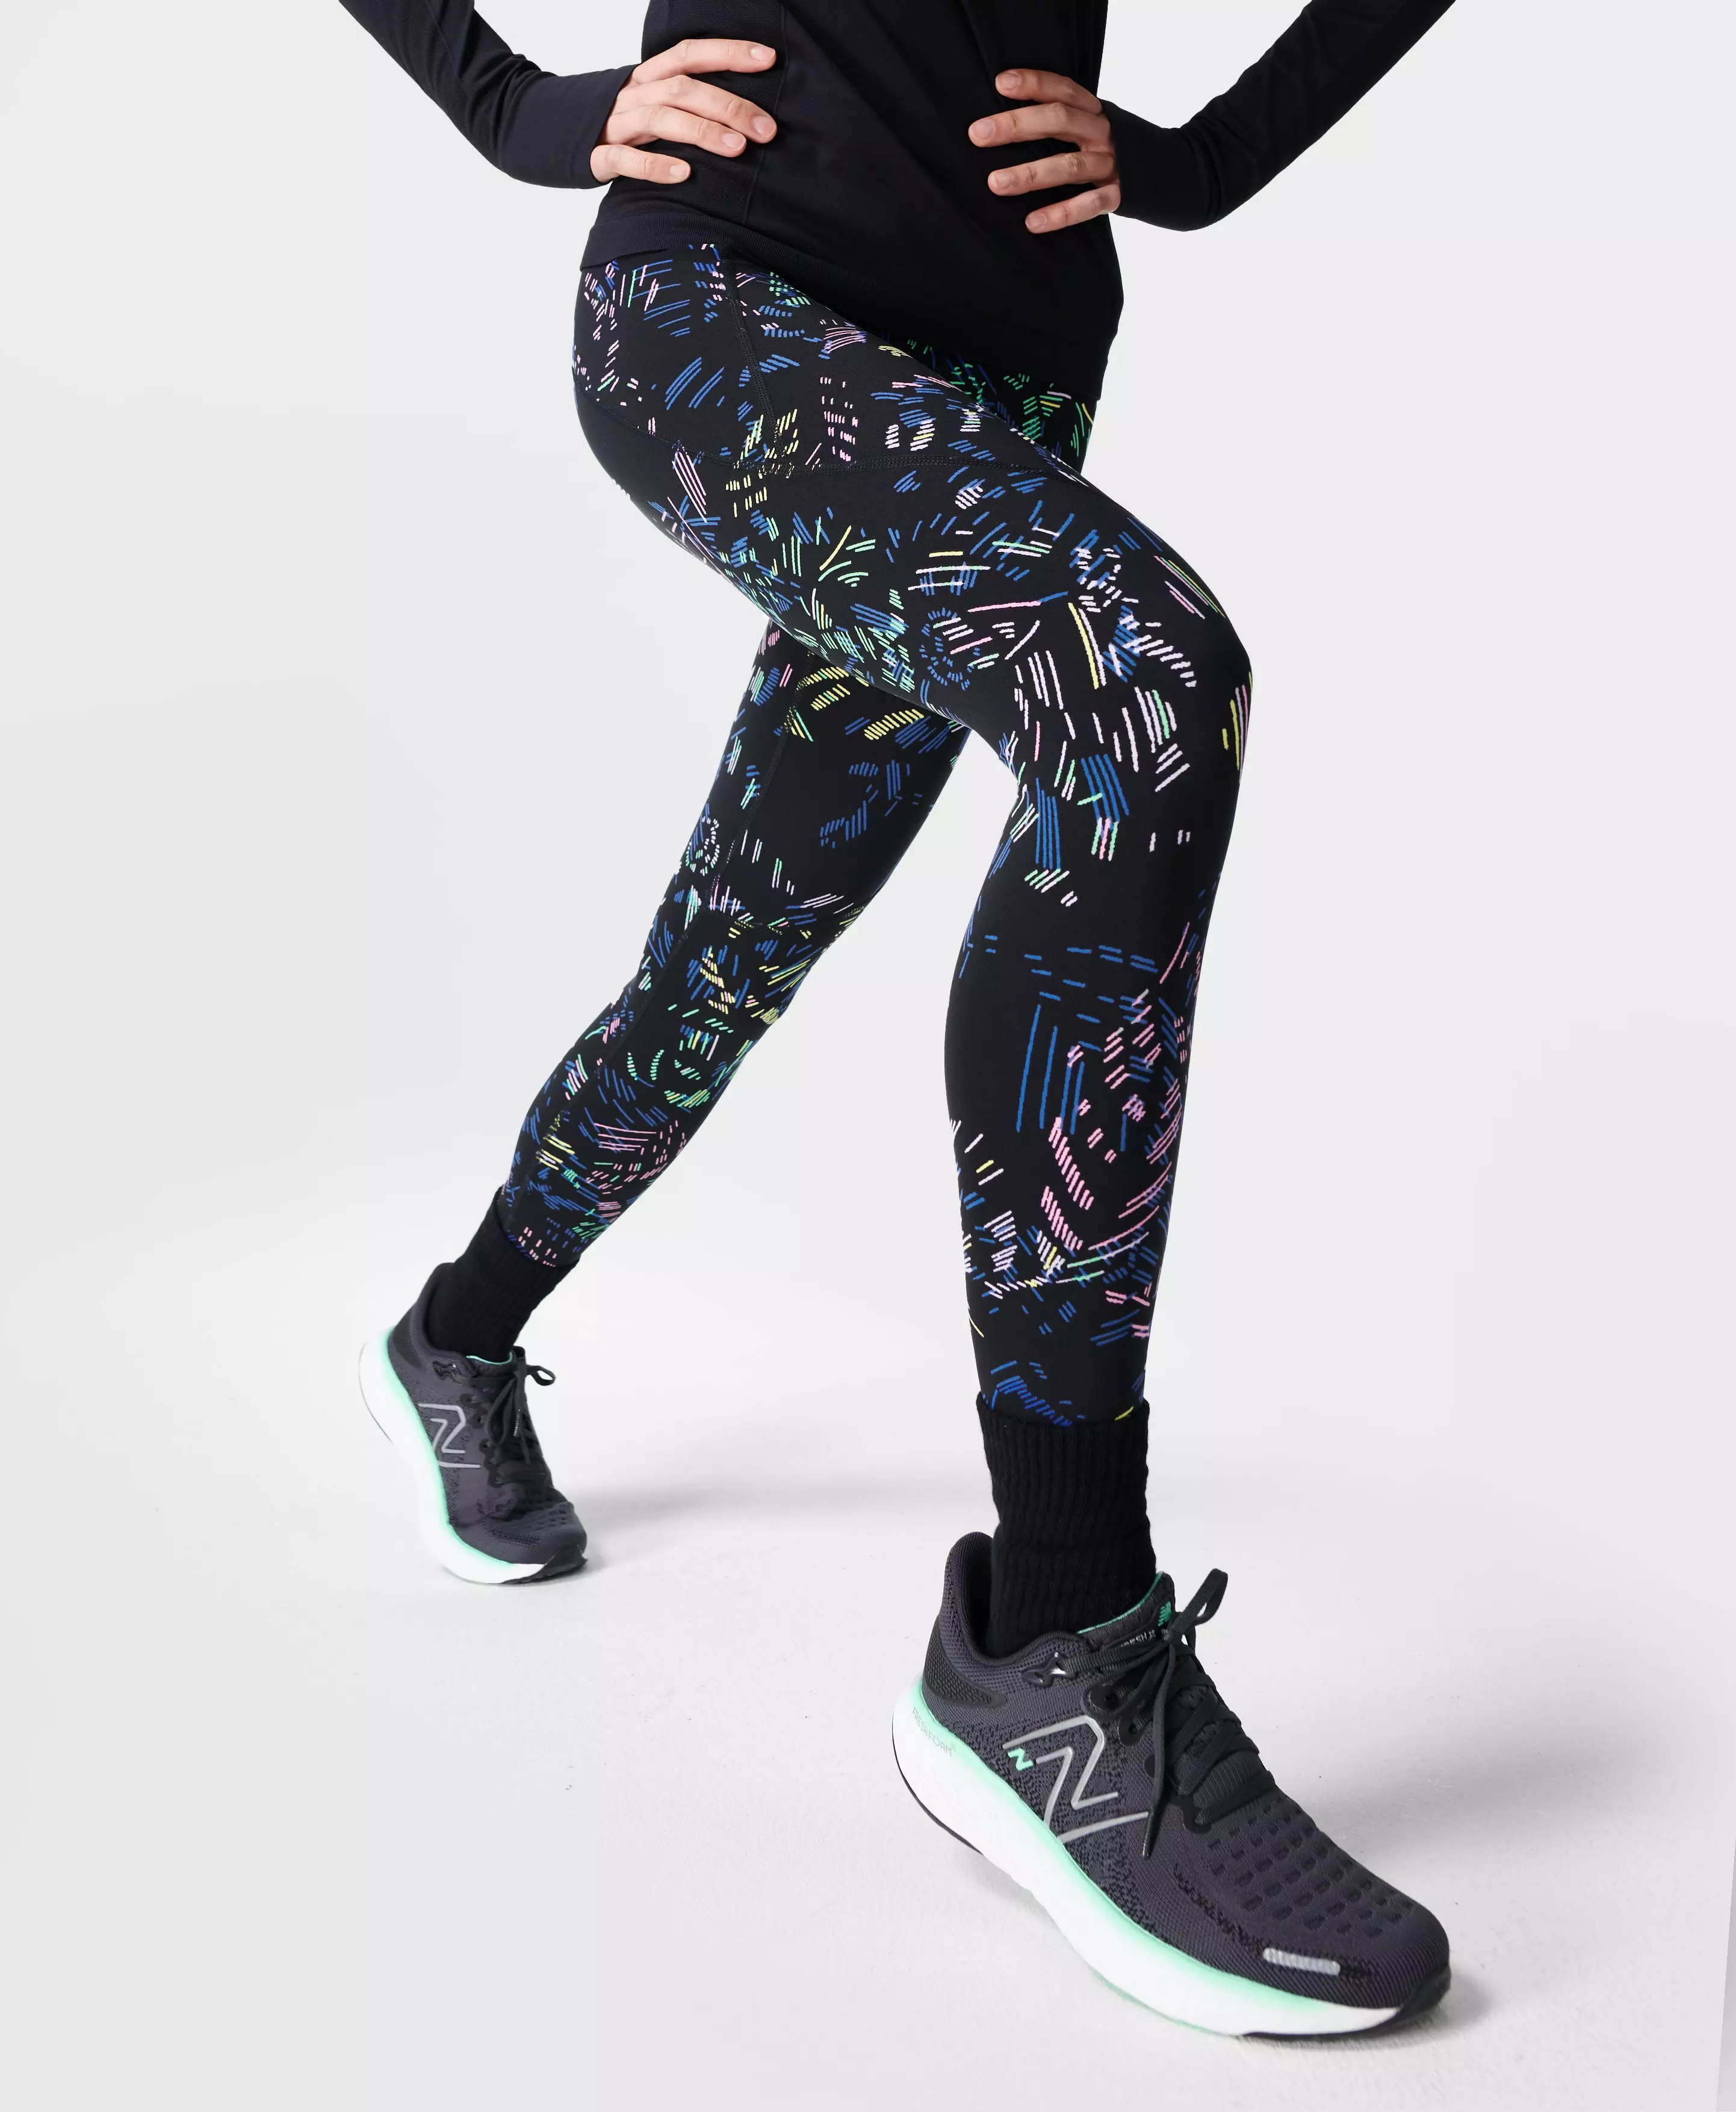 Jogging Leggings for Women YOU'd BETTER RUN! E-store  -  Polish manufacturer of sportswear for fitness, Crossfit, gym, running.  Quick delivery and easy return and exchange